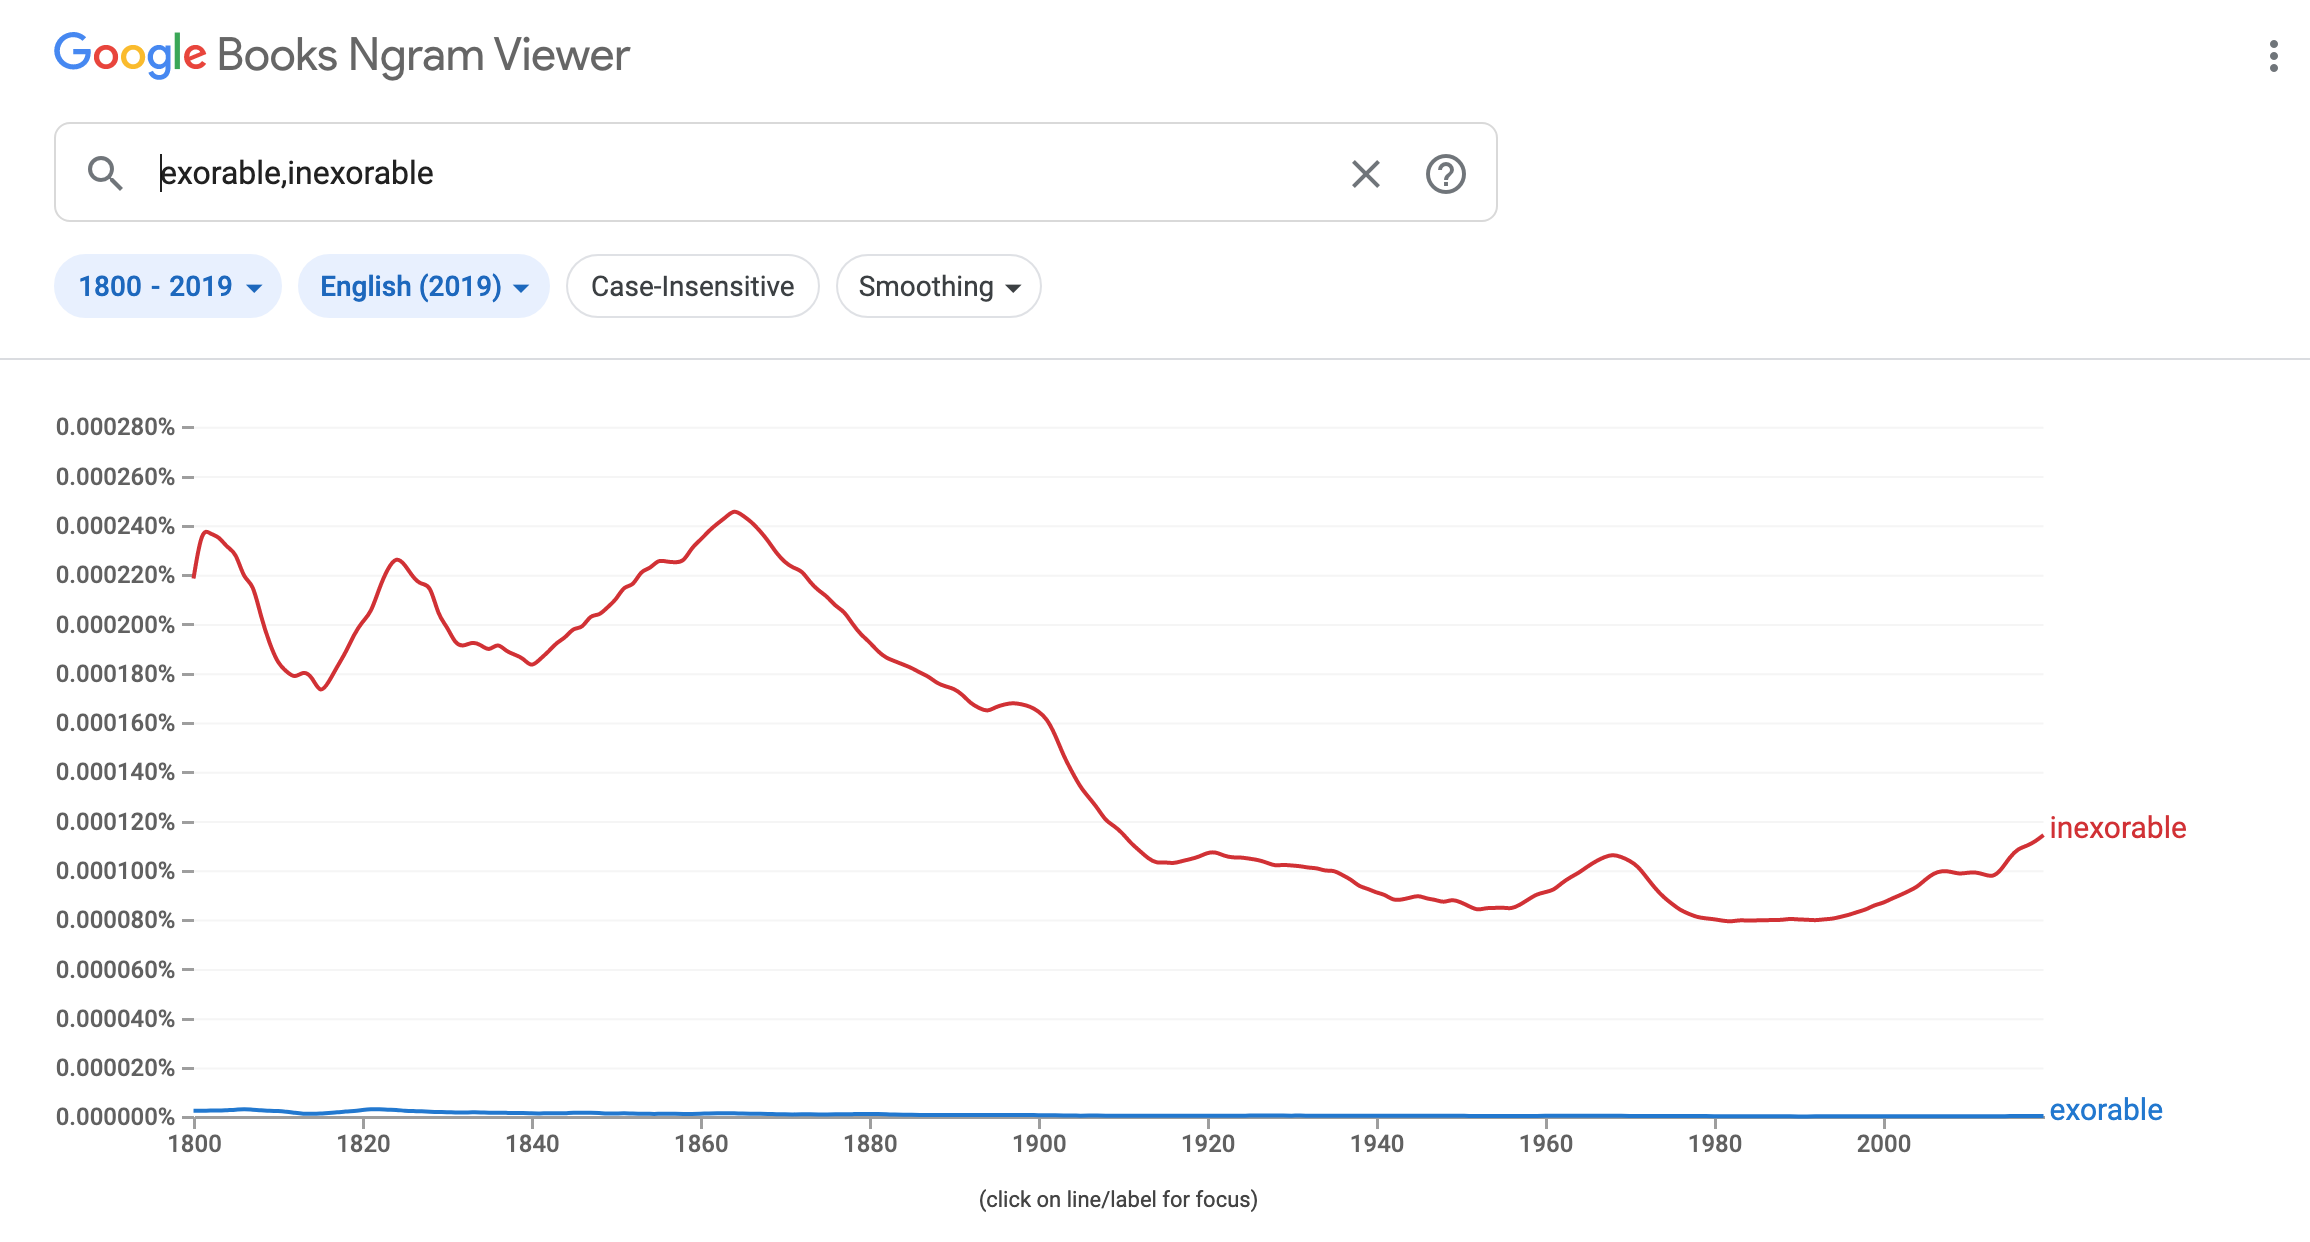 ngram for exorable and inexorable